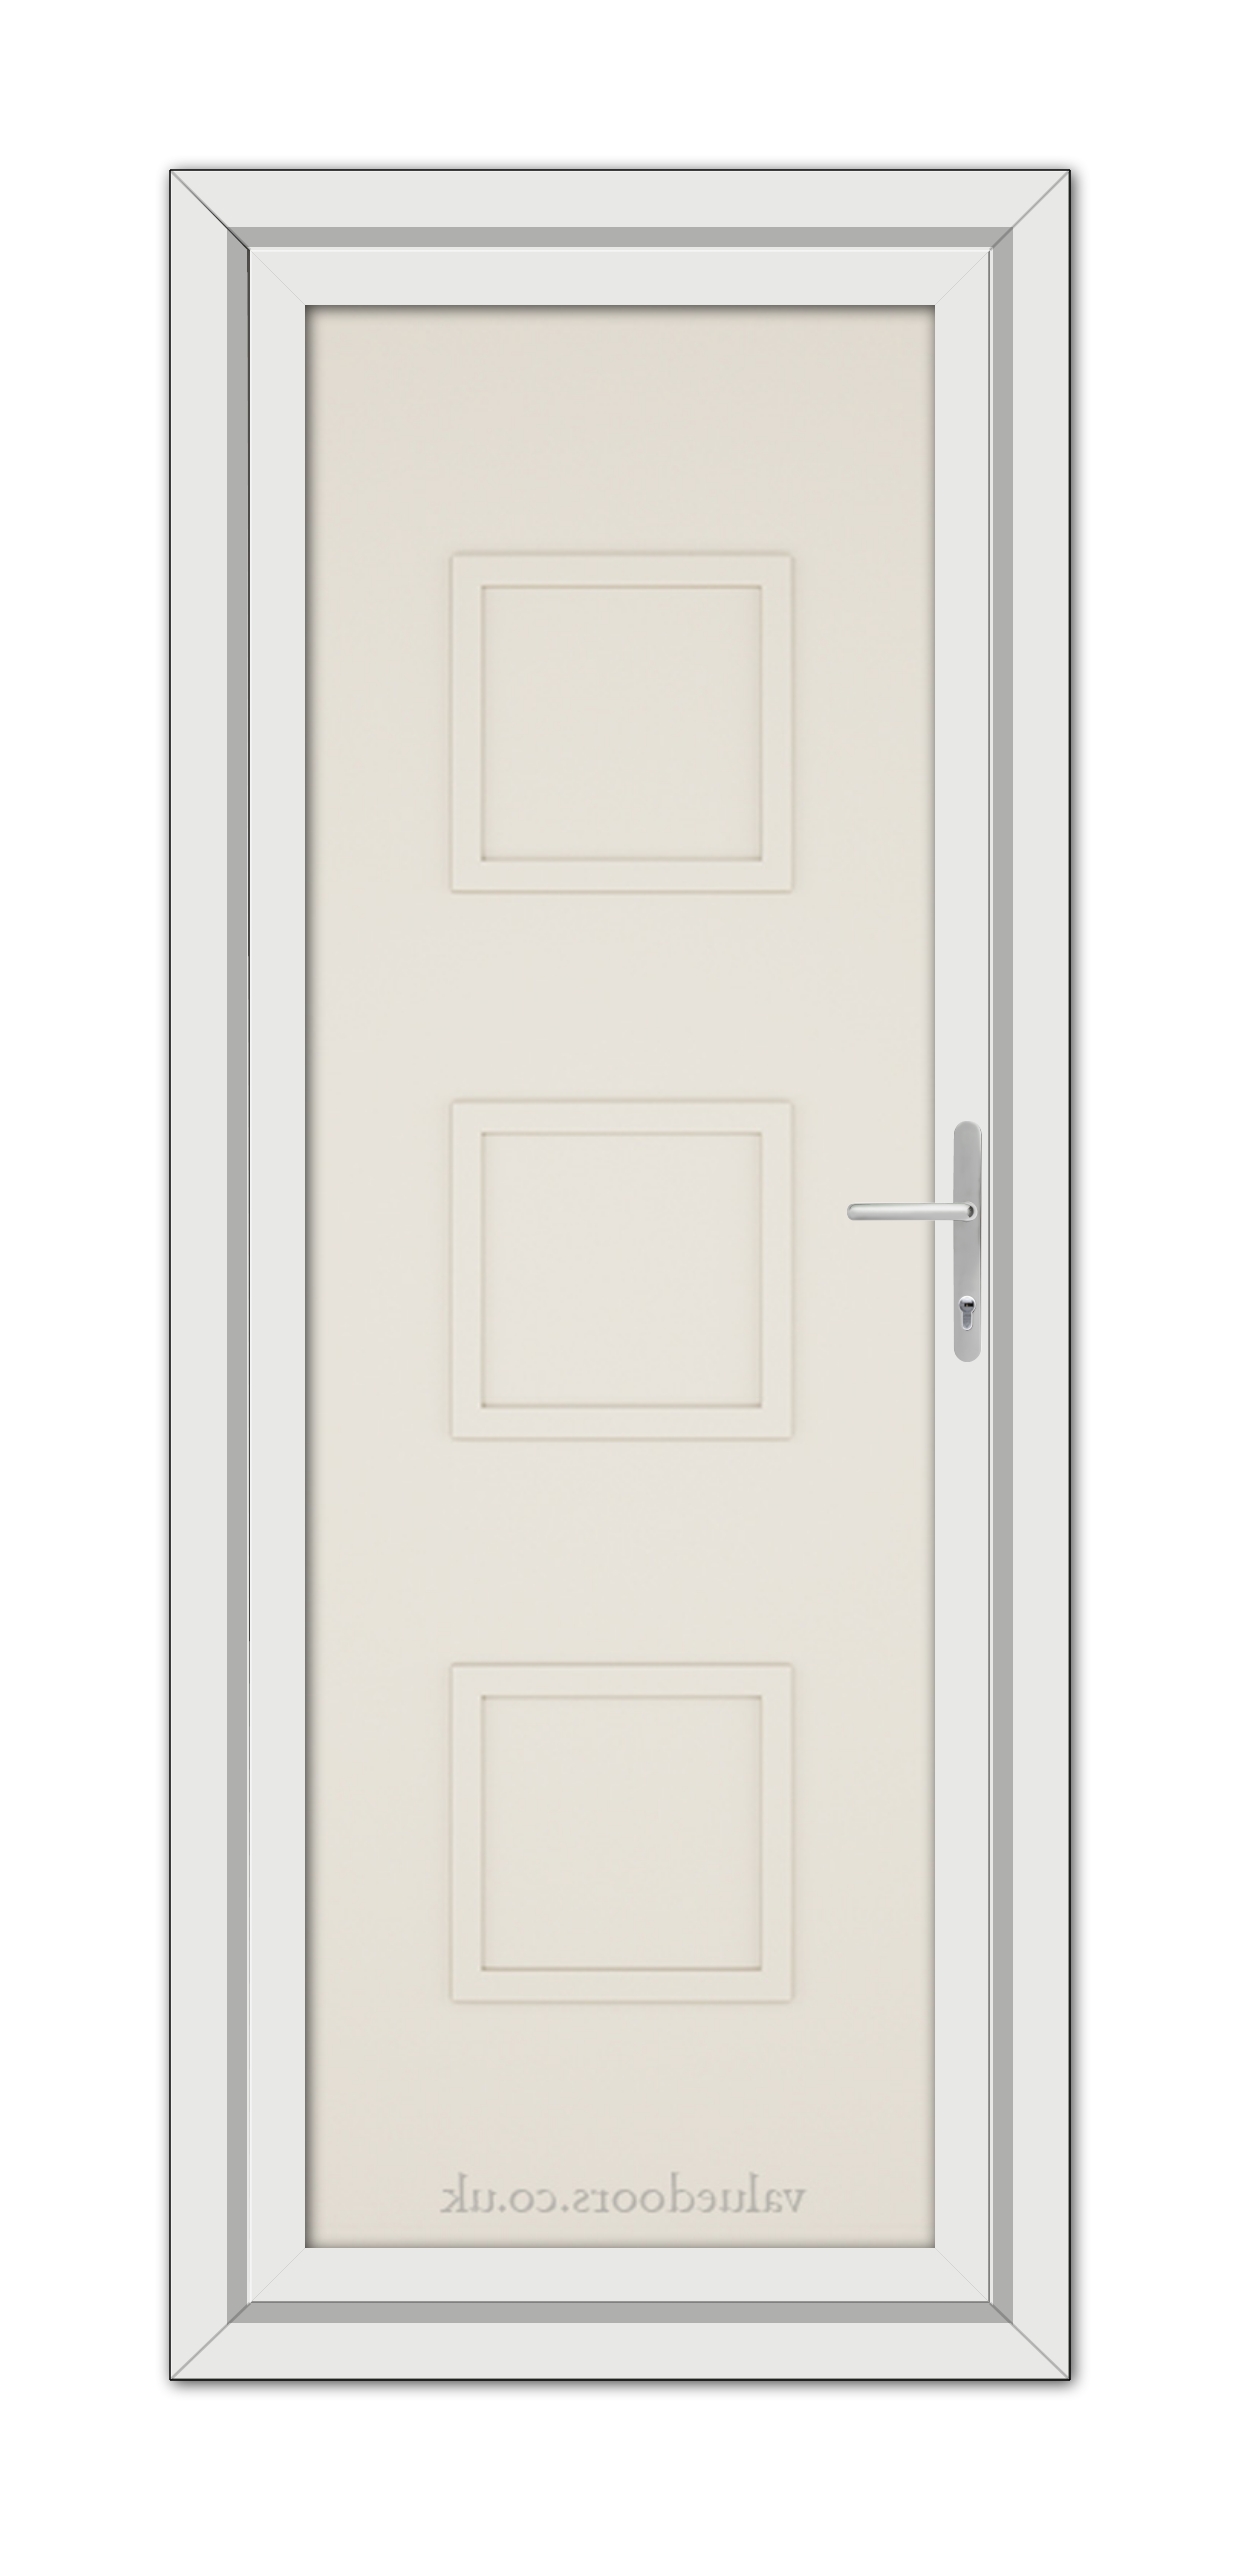 A vertical image of a closed Cream Modern 5013 Solid uPVC door with a silver handle and three rectangular panels, displayed against a white background.